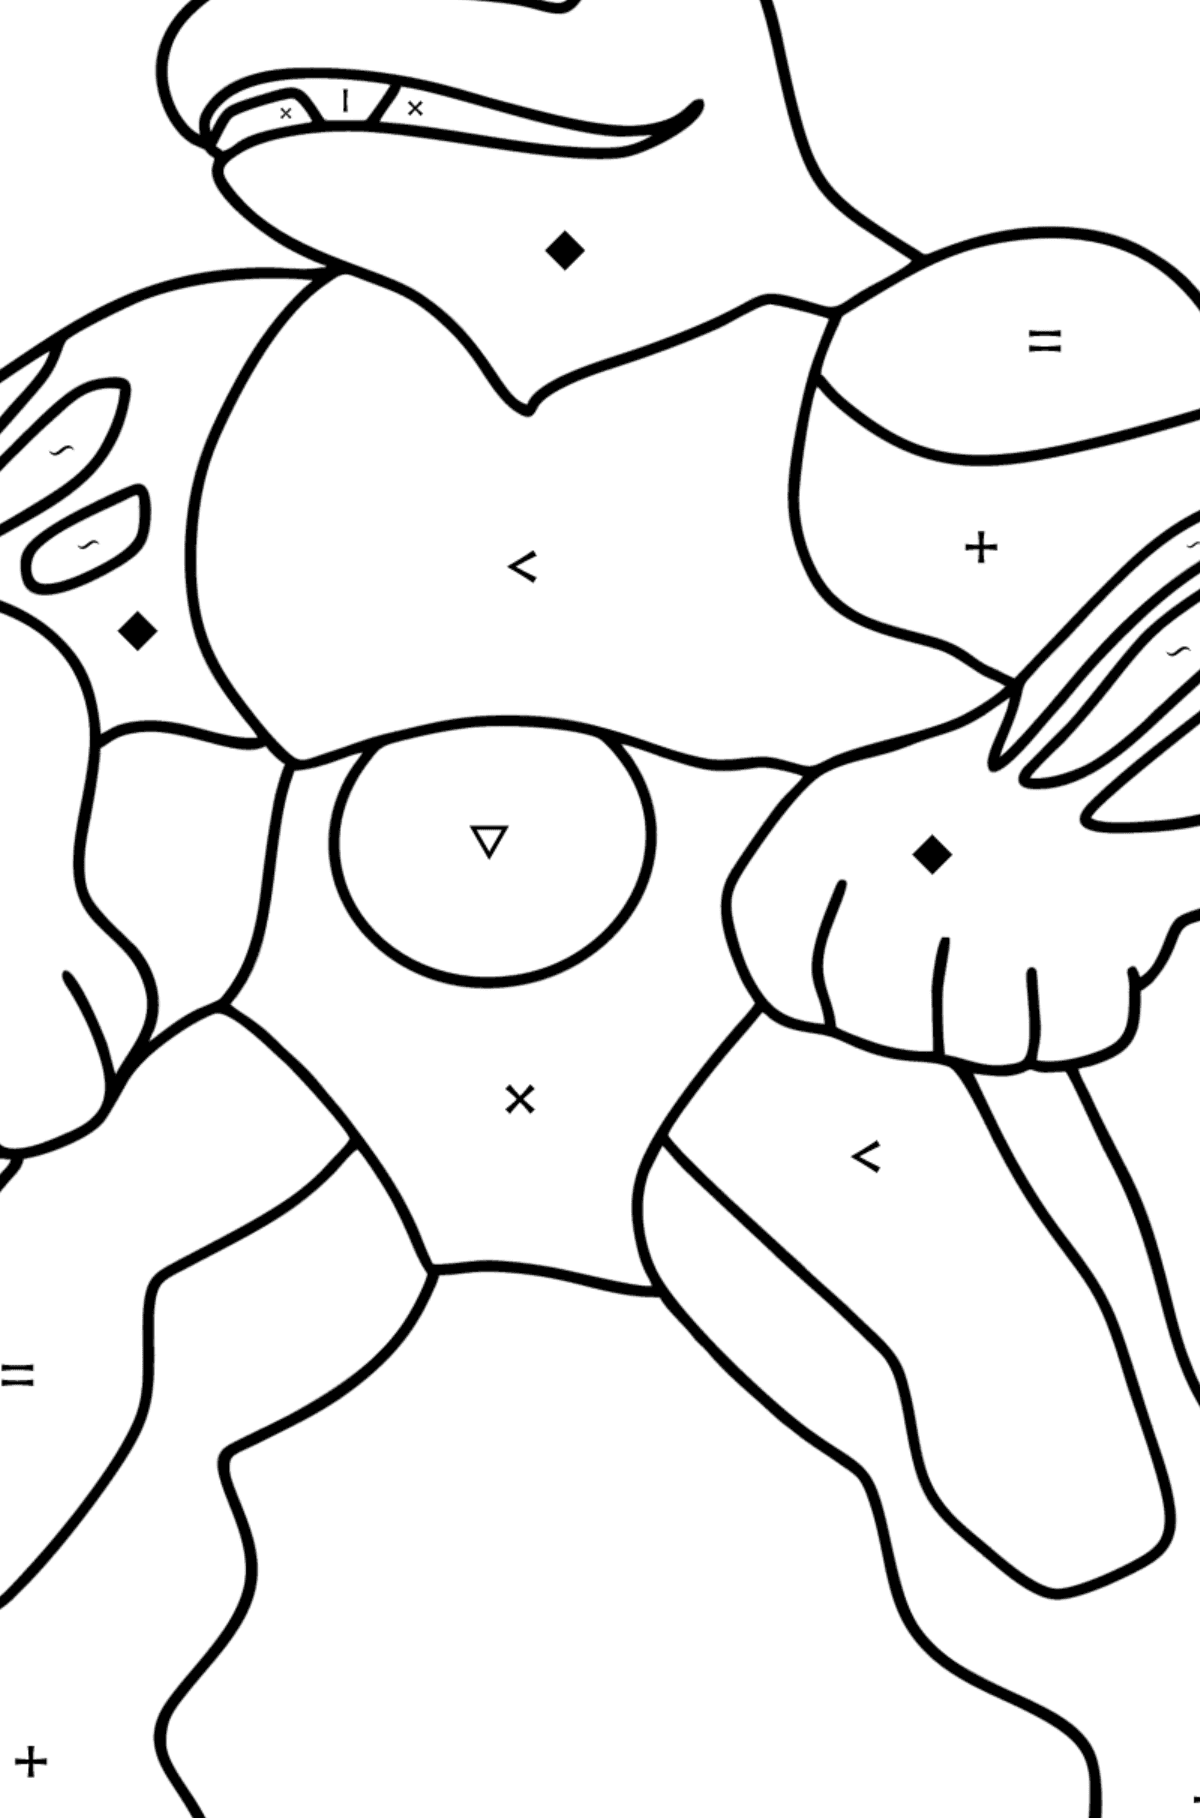 Coloring page Pokemon Go Machoke - Coloring by Symbols for Kids